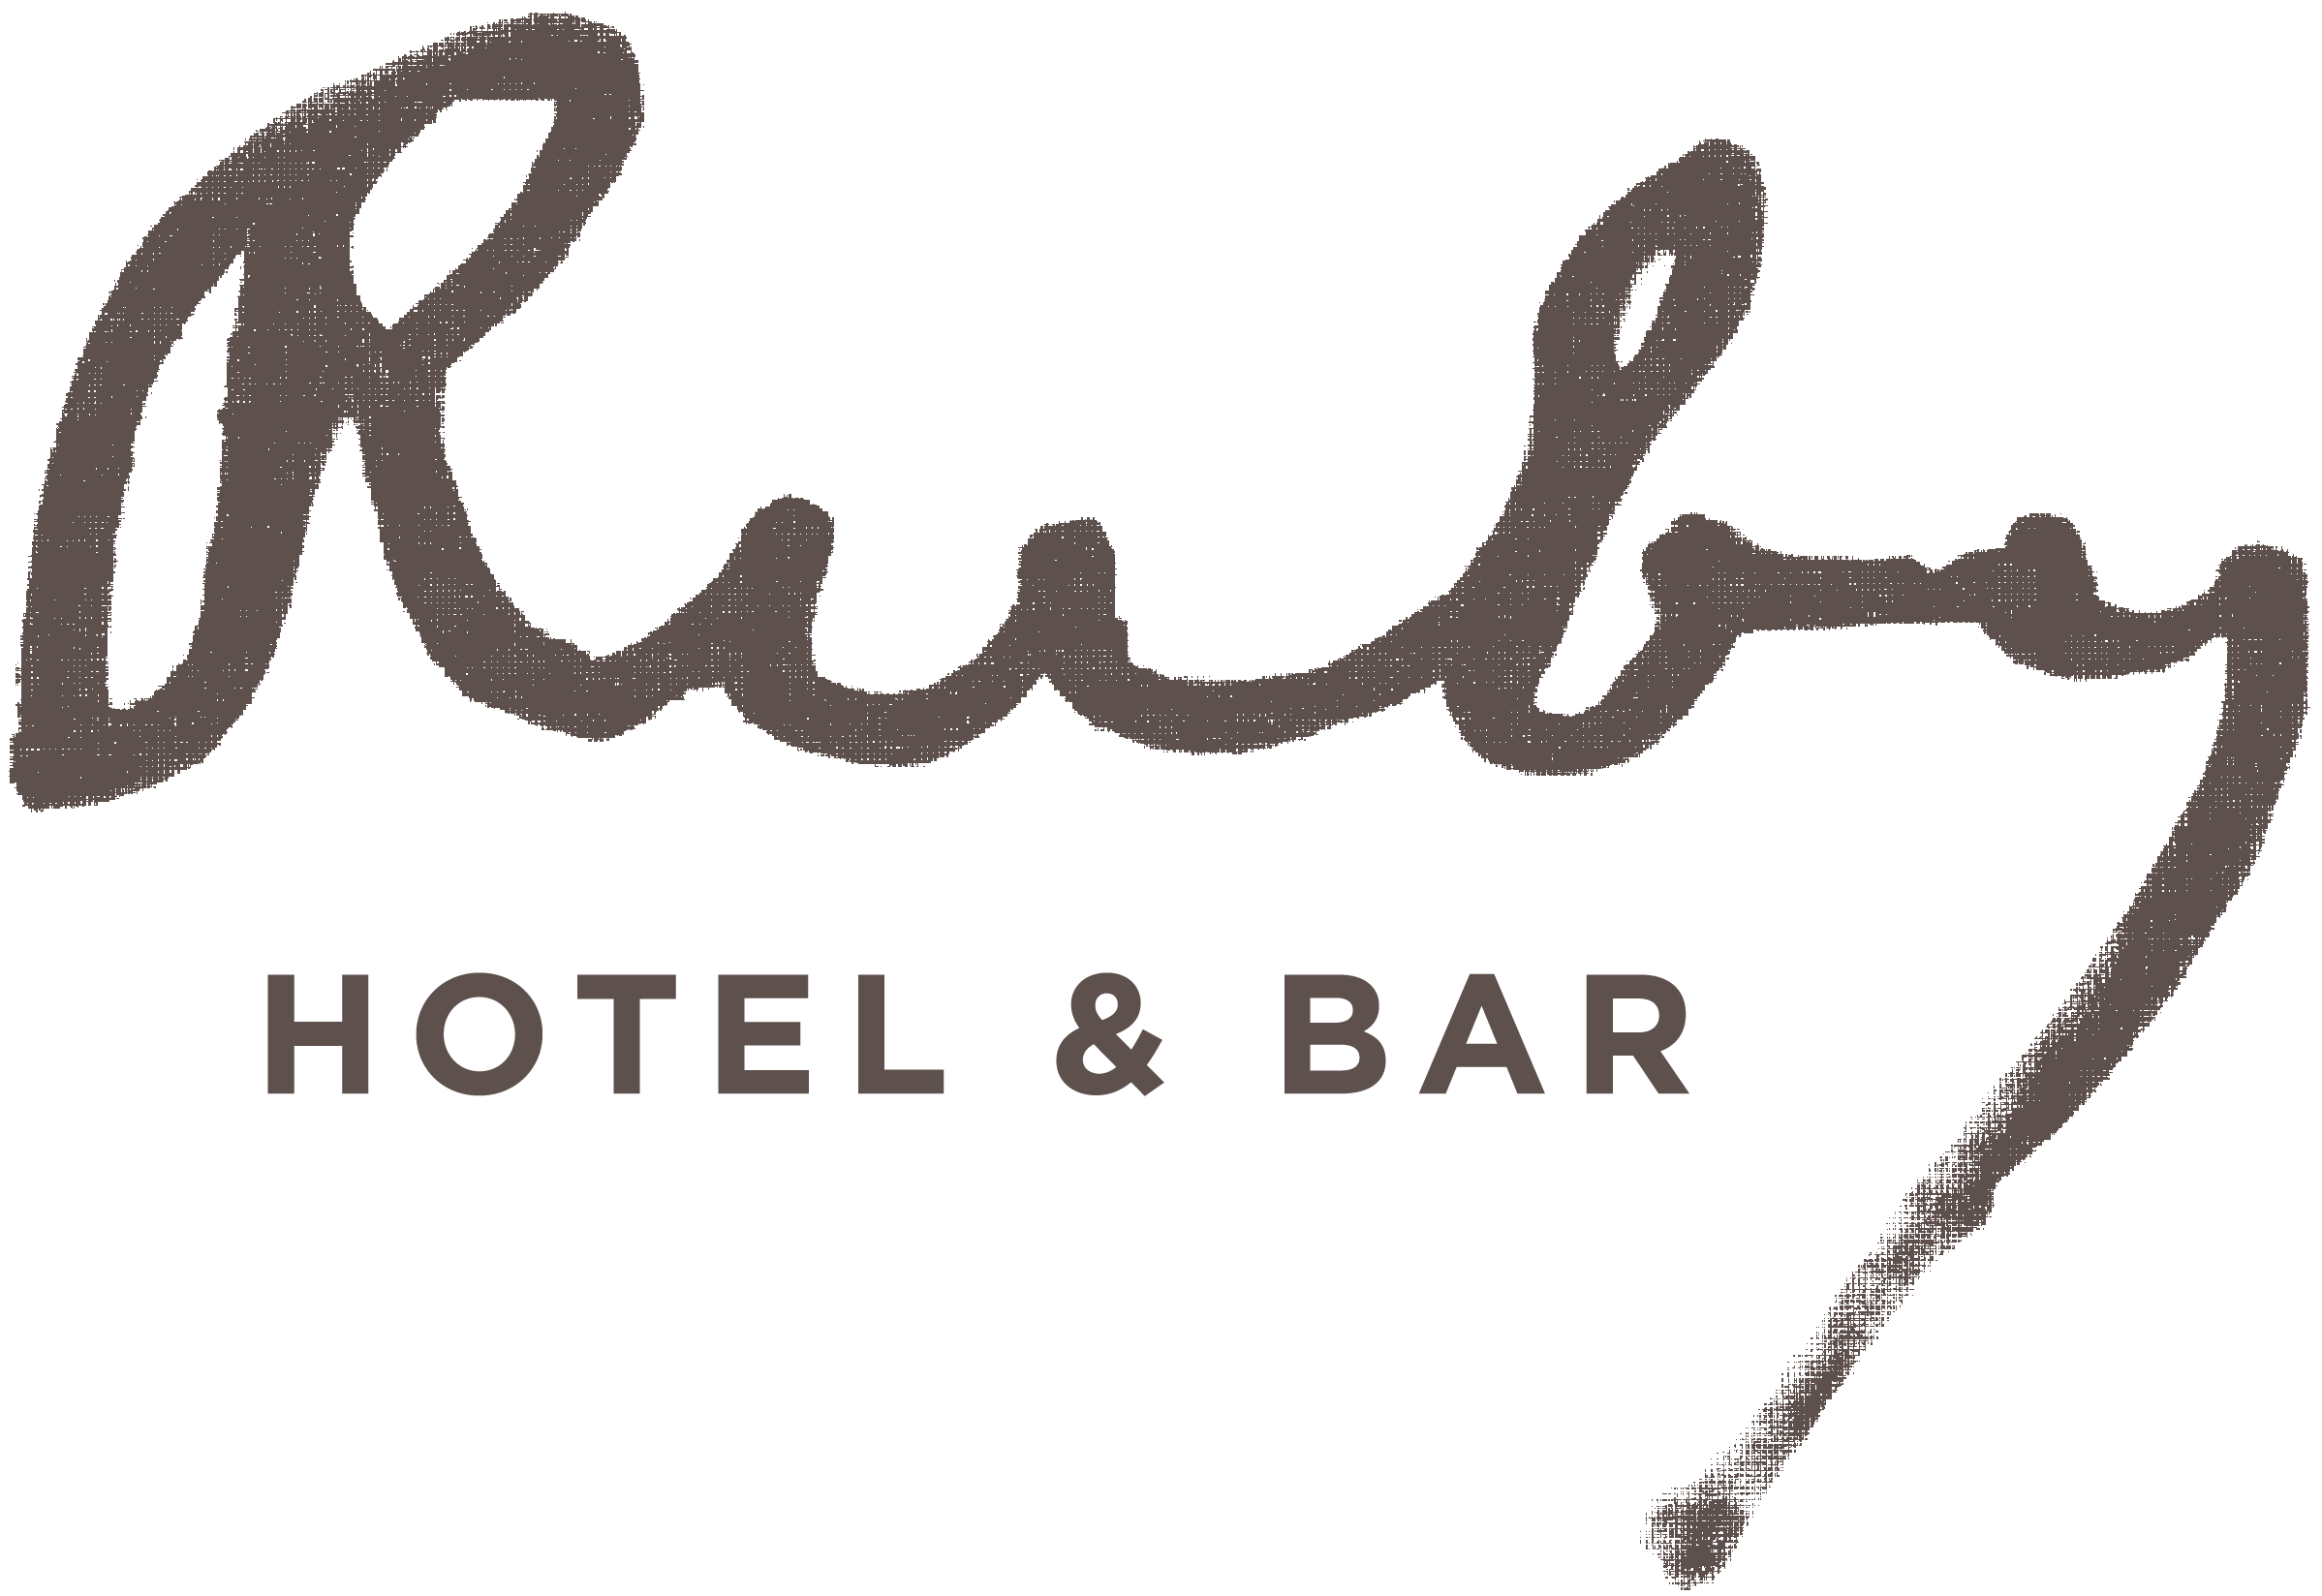 The Ruby Hotel